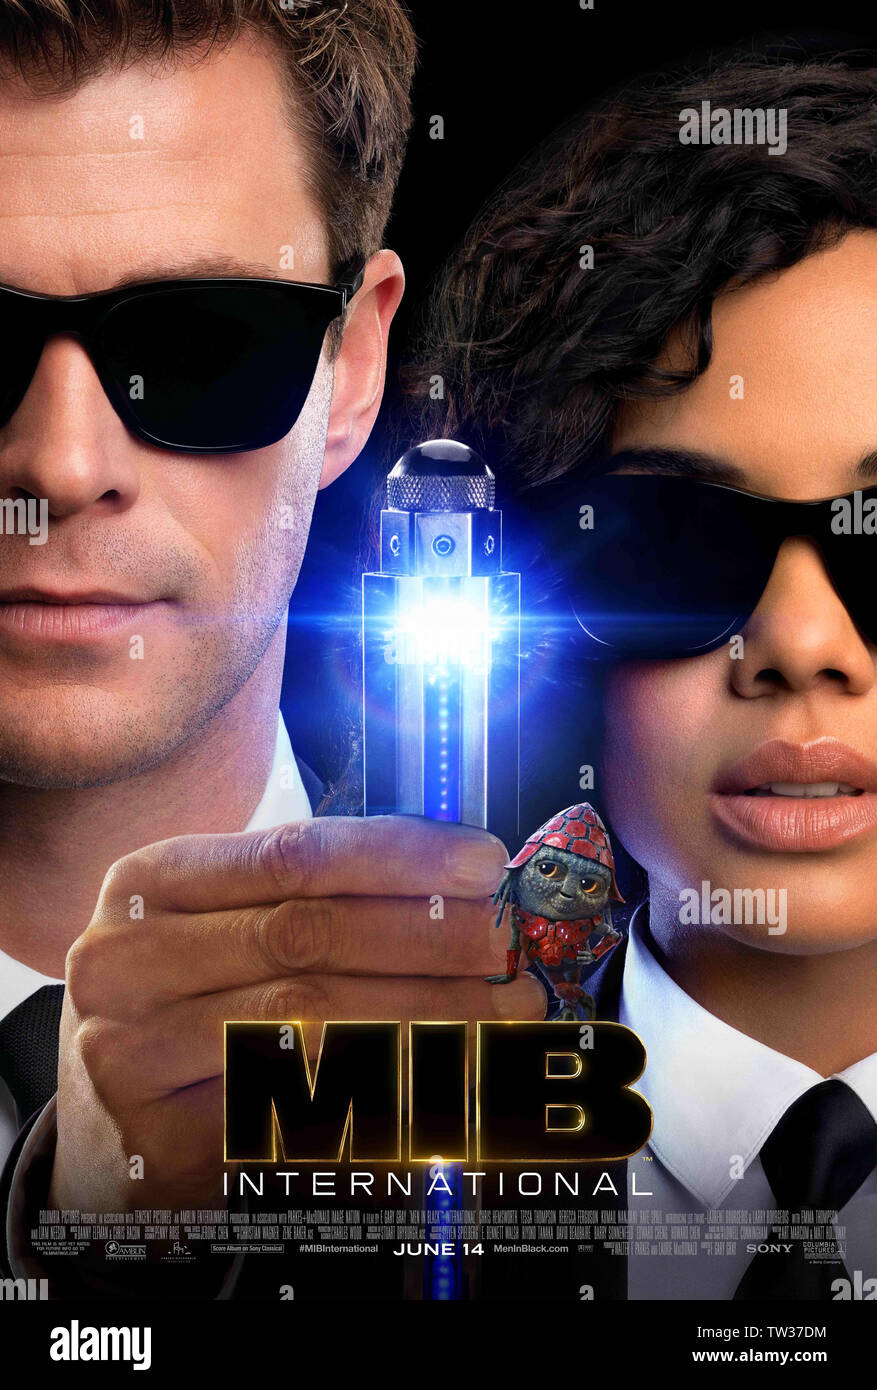 men-in-black-international-2019-directed-by-f-gary-gary-and-starring-chris-hemsworth-tessa-thompson-and-kumail-nanjiani-the-men-in-black-discover-a-mole-in-their-secret-organisation-TW37DM.jpg